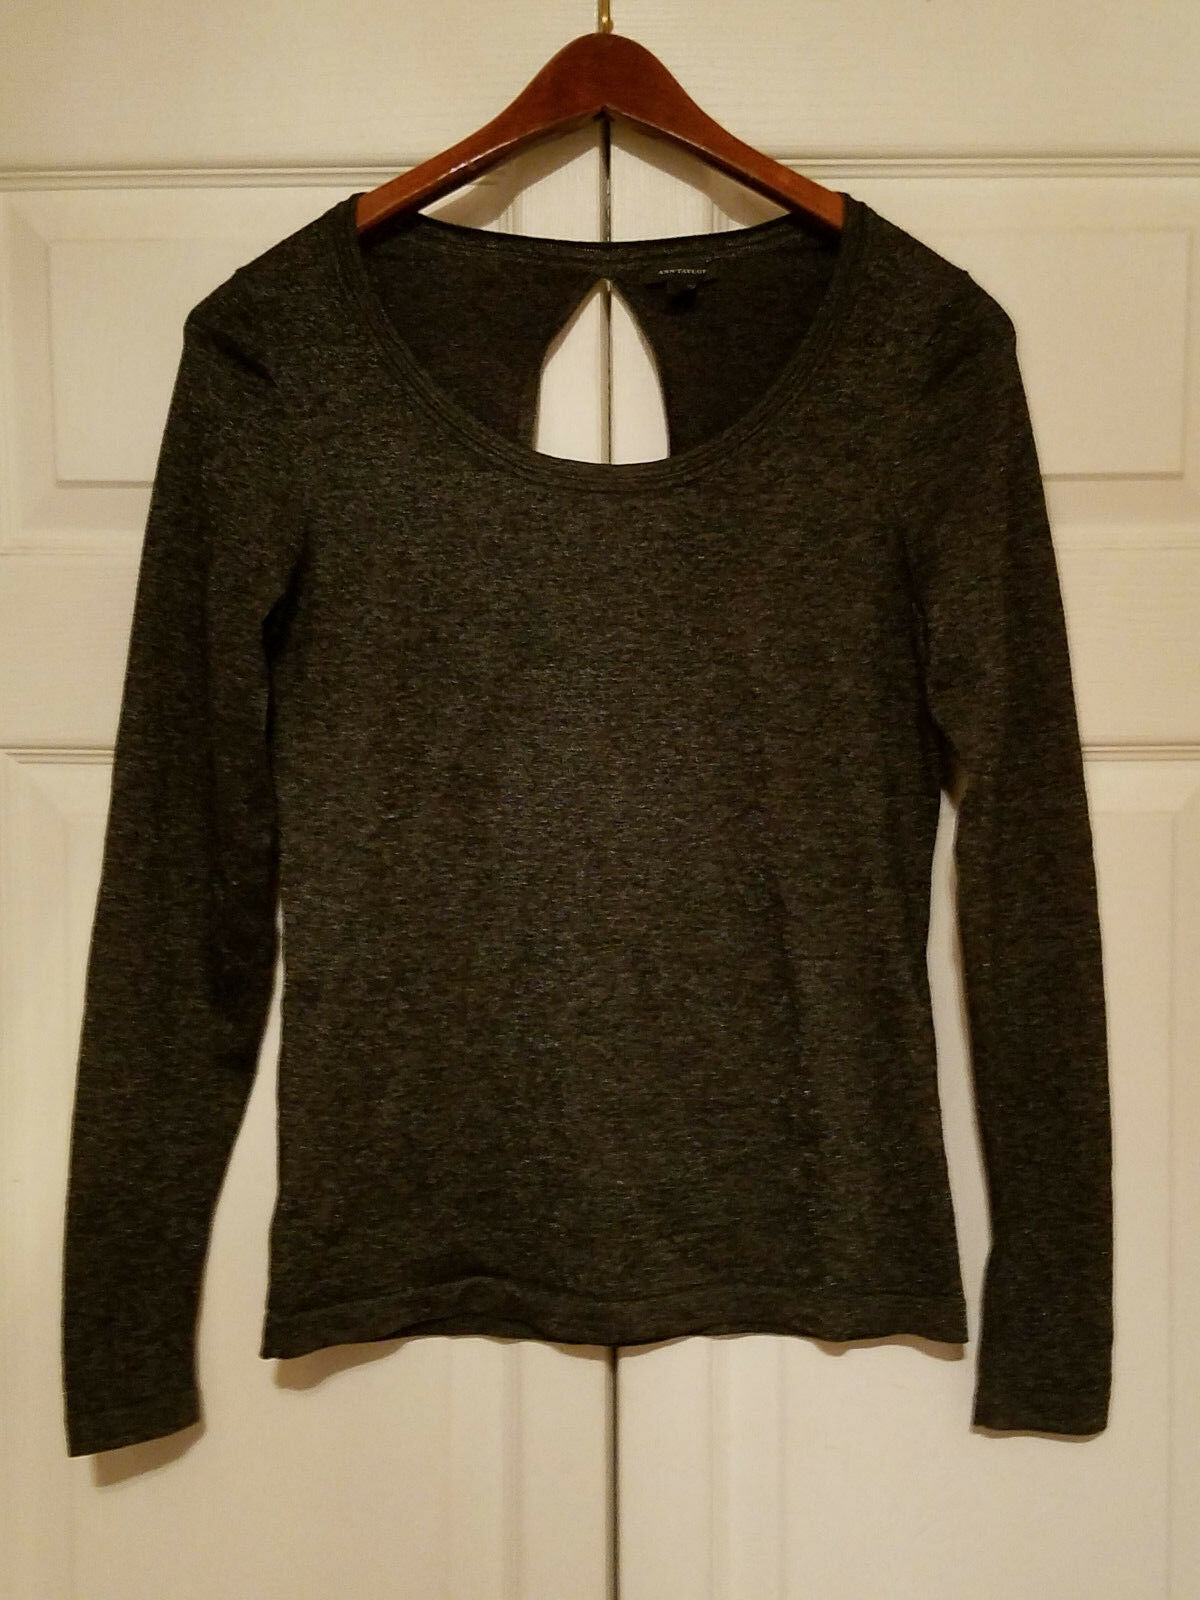 Primary image for ANN TAYLOR BLACK & SILVER METALLIC SIZE SMALL LONG SLEEVE TOP